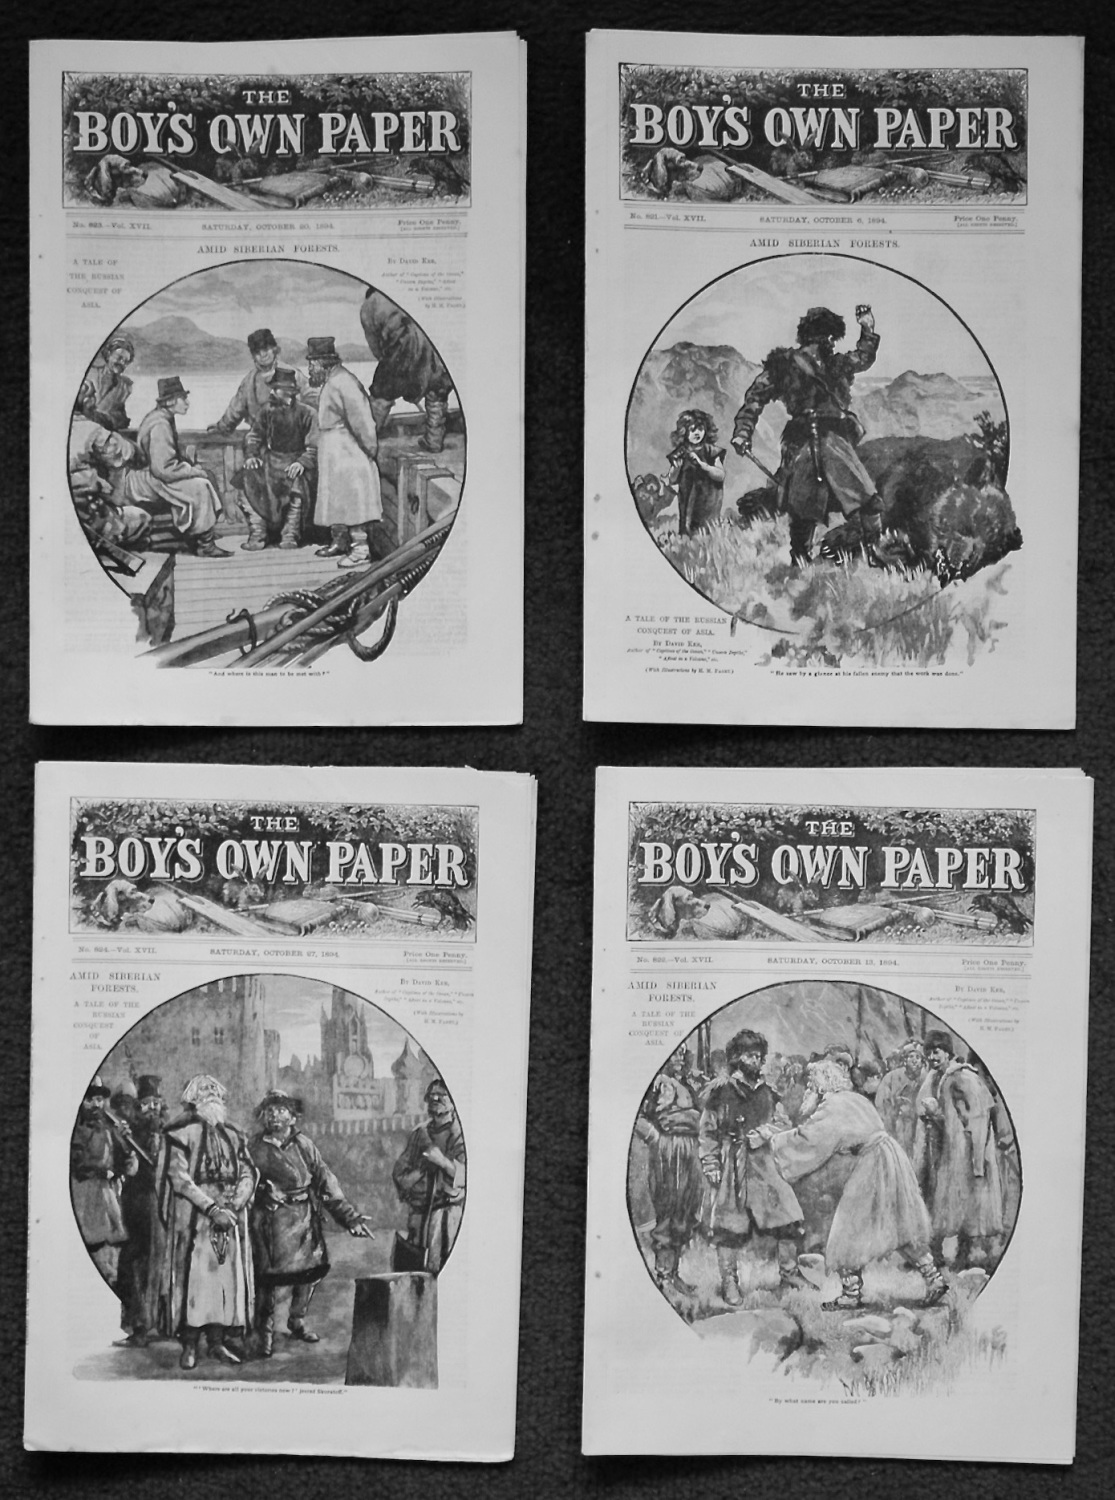 The Boy's Own Paper. 1894.